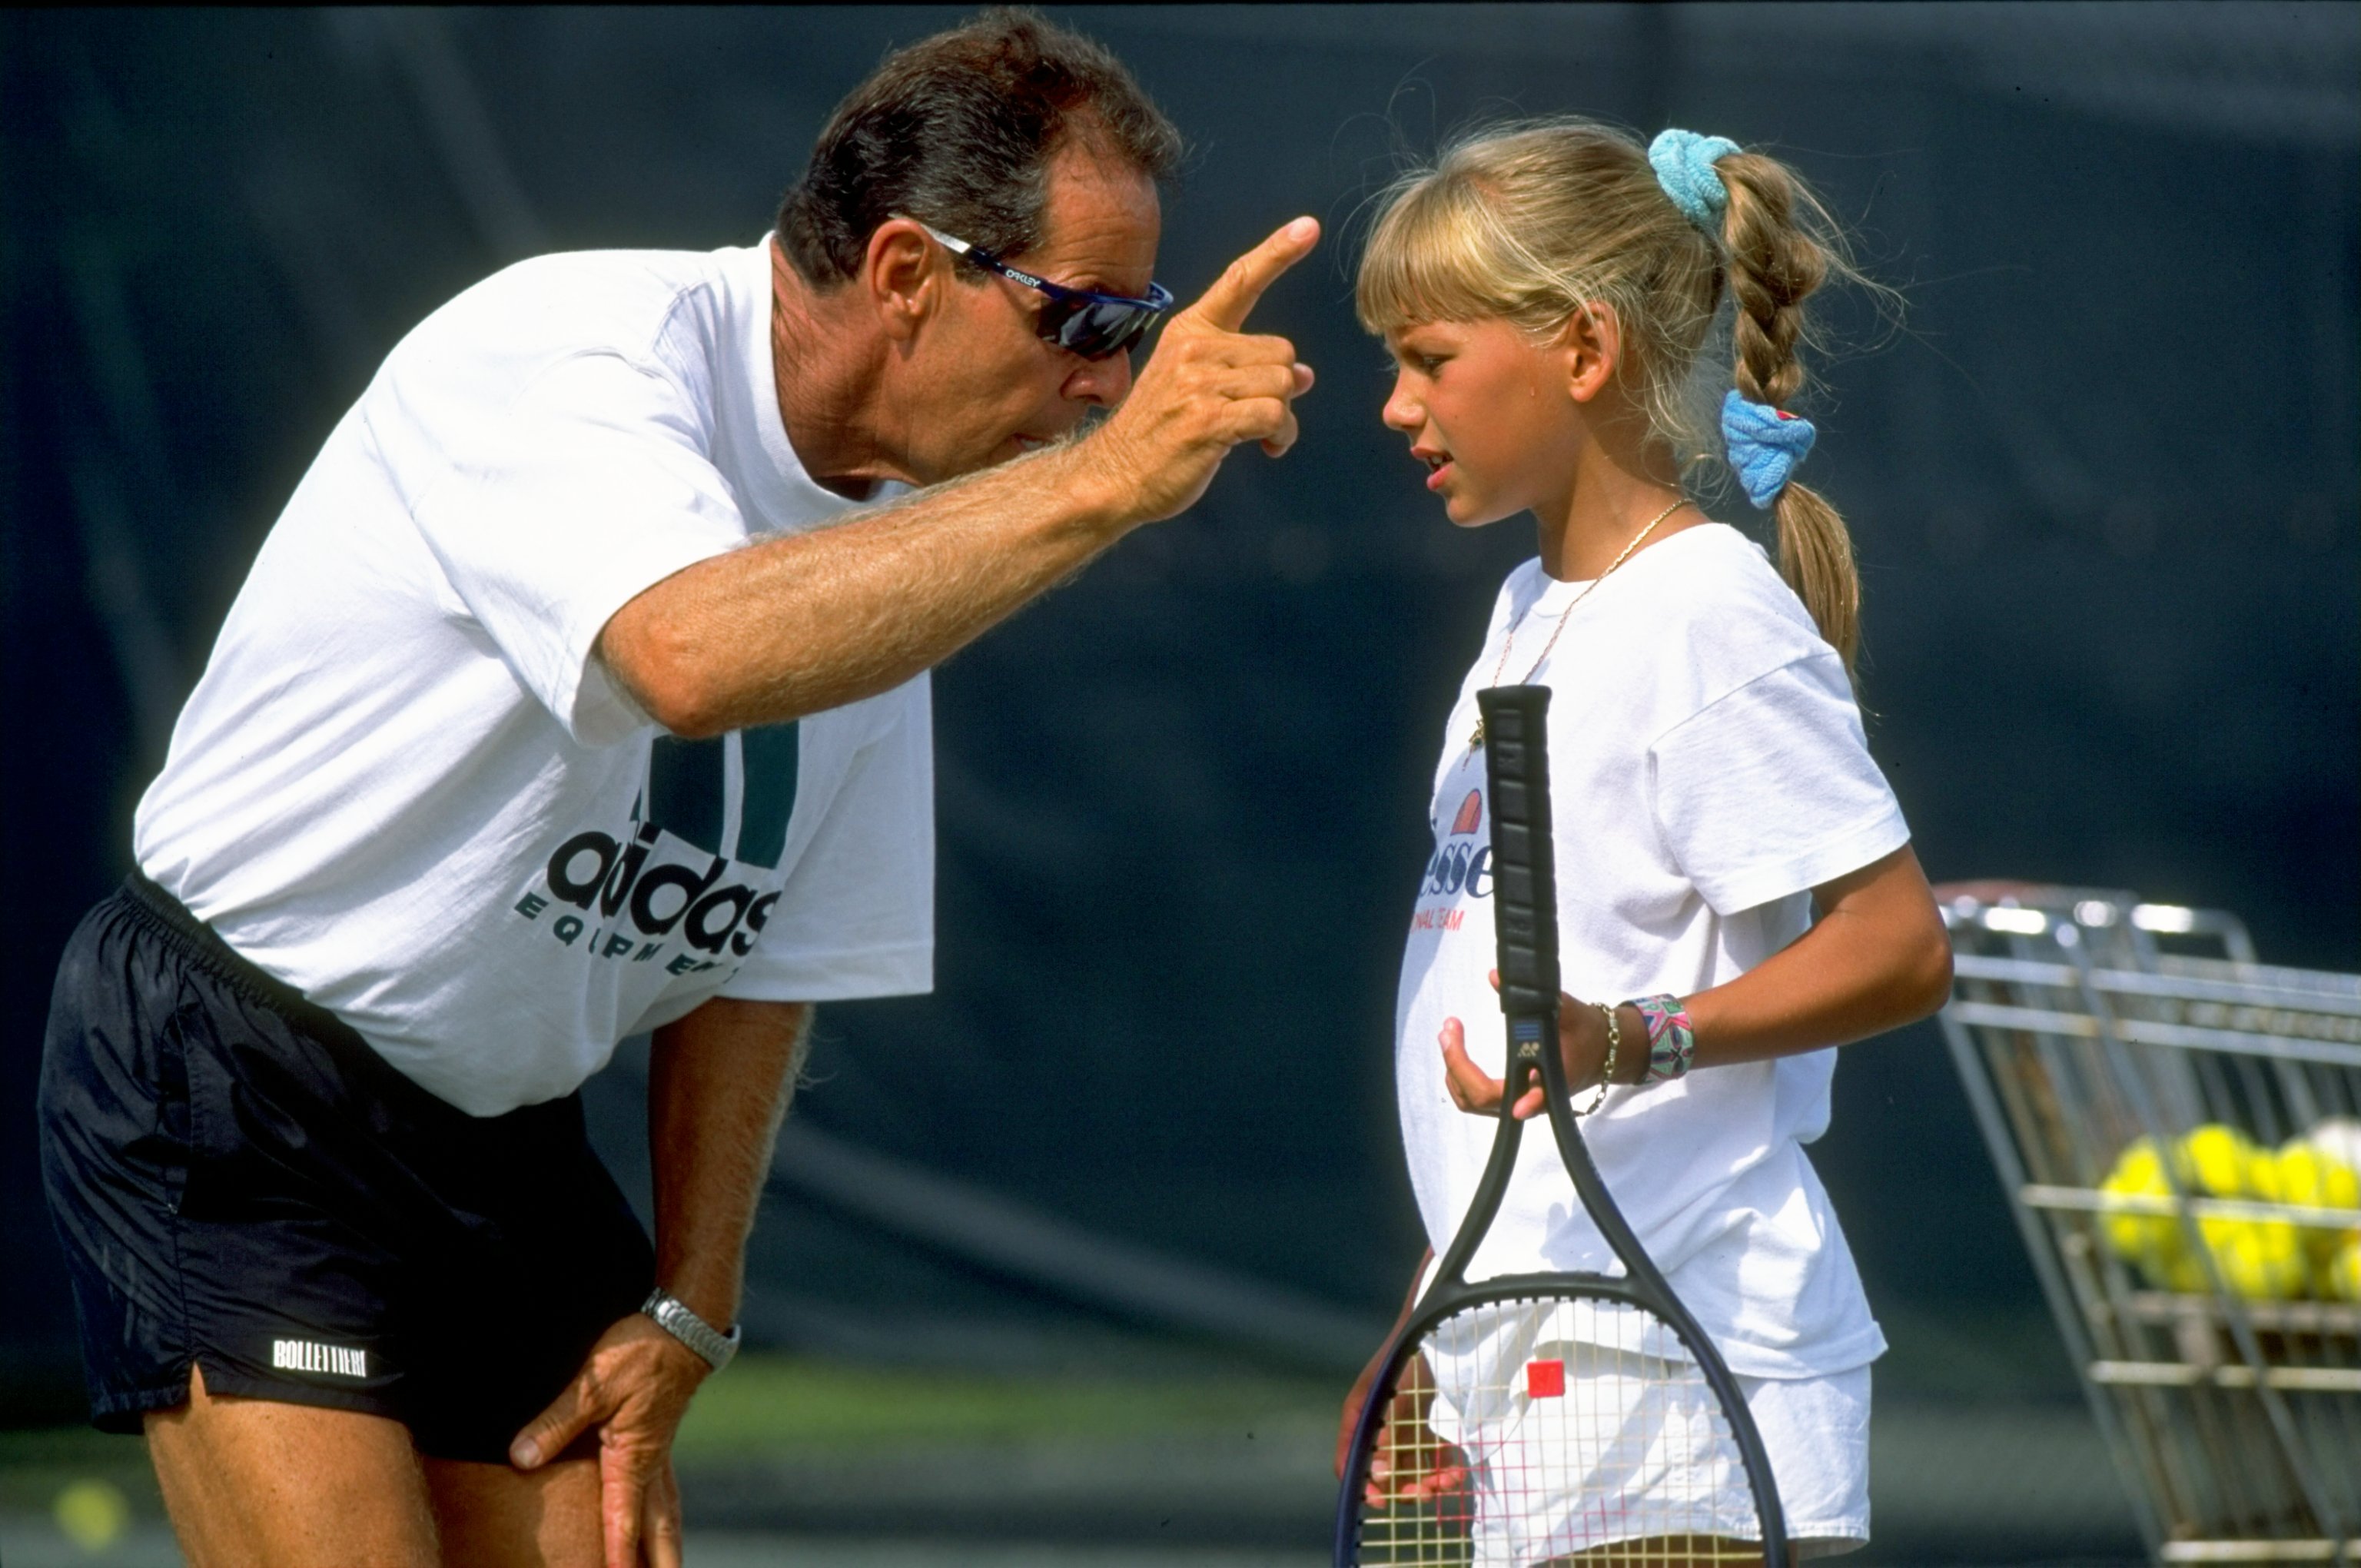 , Bollettieri dead at 91: Tributes paid to legendary tennis coach who launched careers of Williams sisters and Agassi